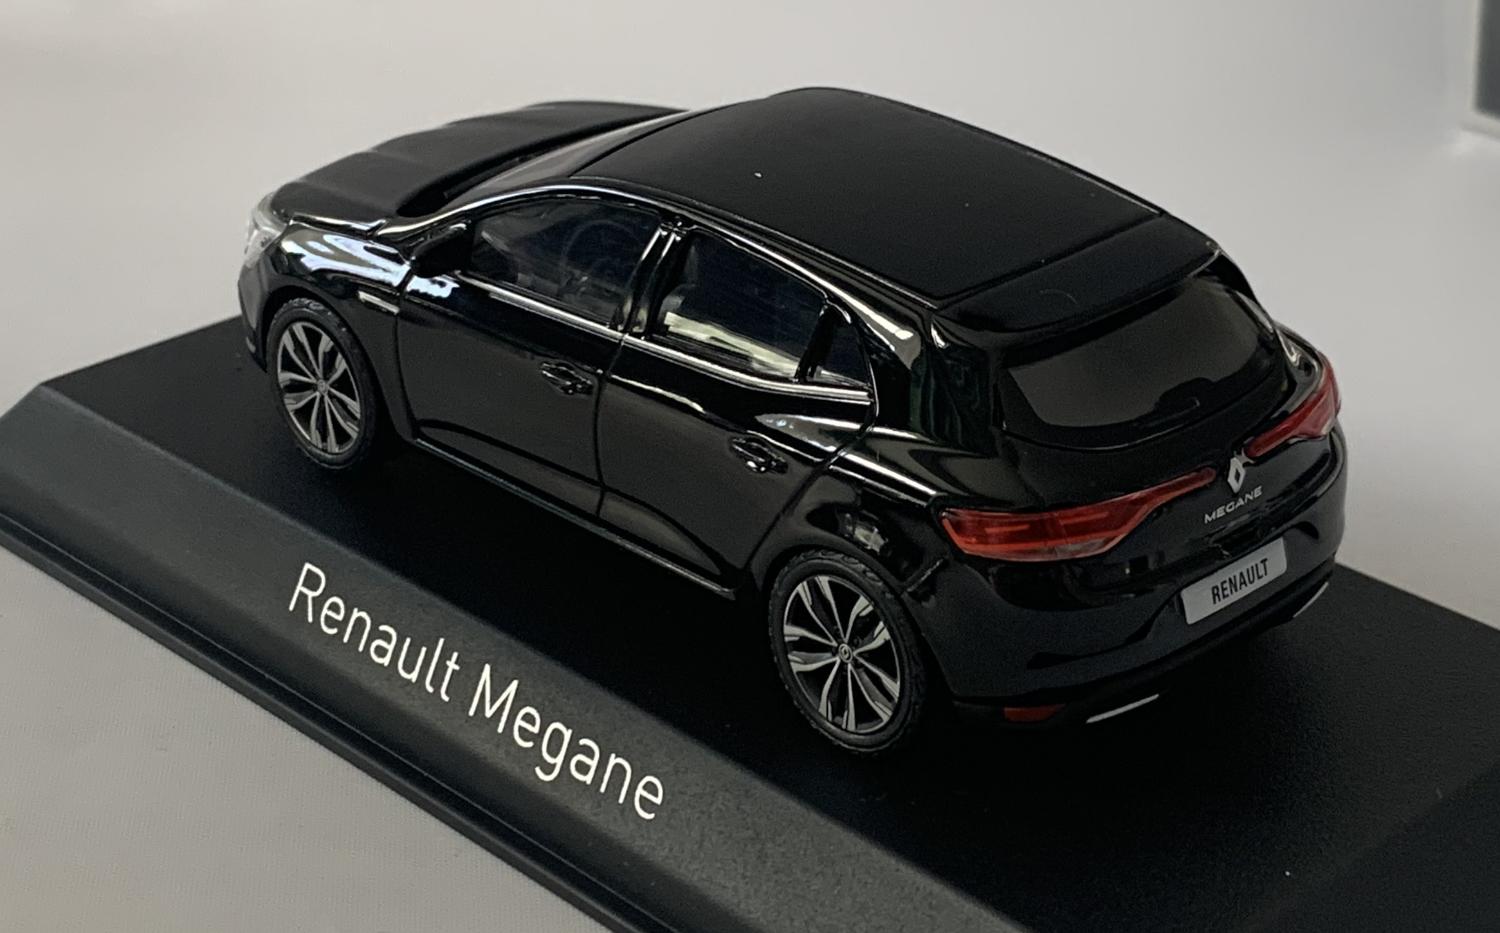 An excellent scale model of a Renault Megane decorated in black with roof top spoiler, tinted windows,